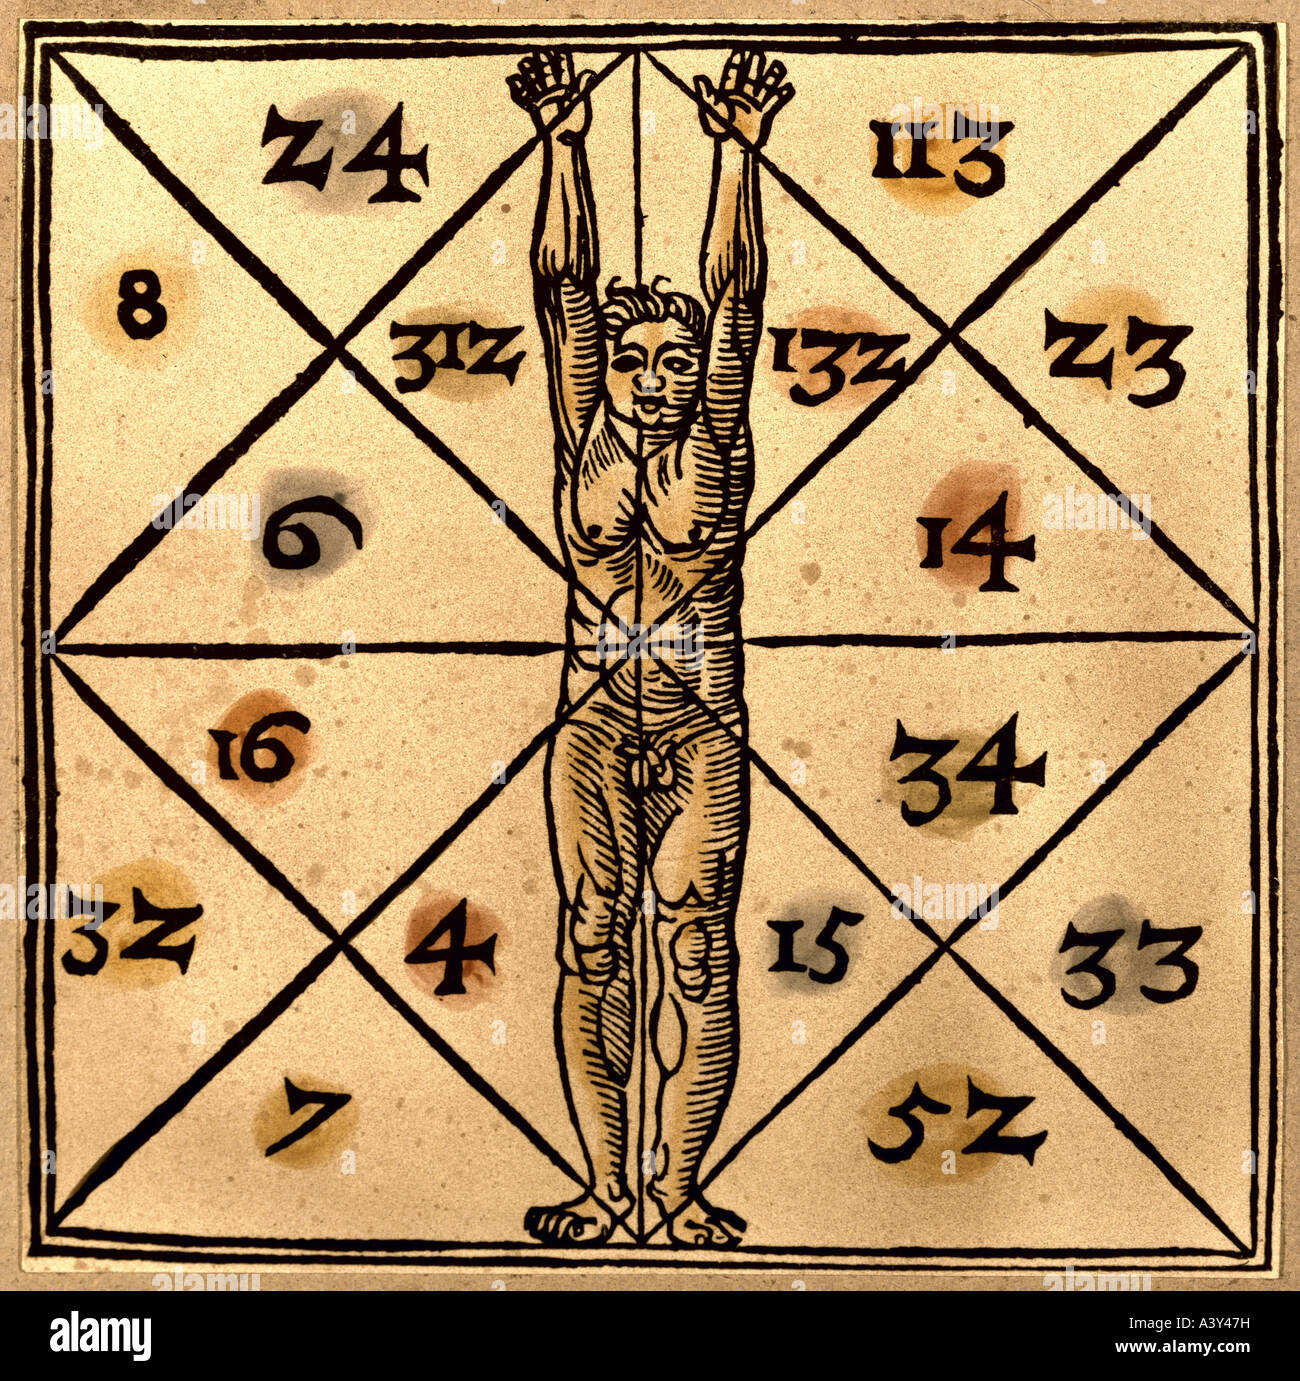 superstition, magic rows of numbers, macrocosmic correspondents to body parts and internal organs, colour woodcut, from textbook of occult medicine, Germany, second half 16th century, private collection, historic, historical, Europe, esotericism, occultism, magic, number, macrocosmos, human, organ, people, Stock Photo